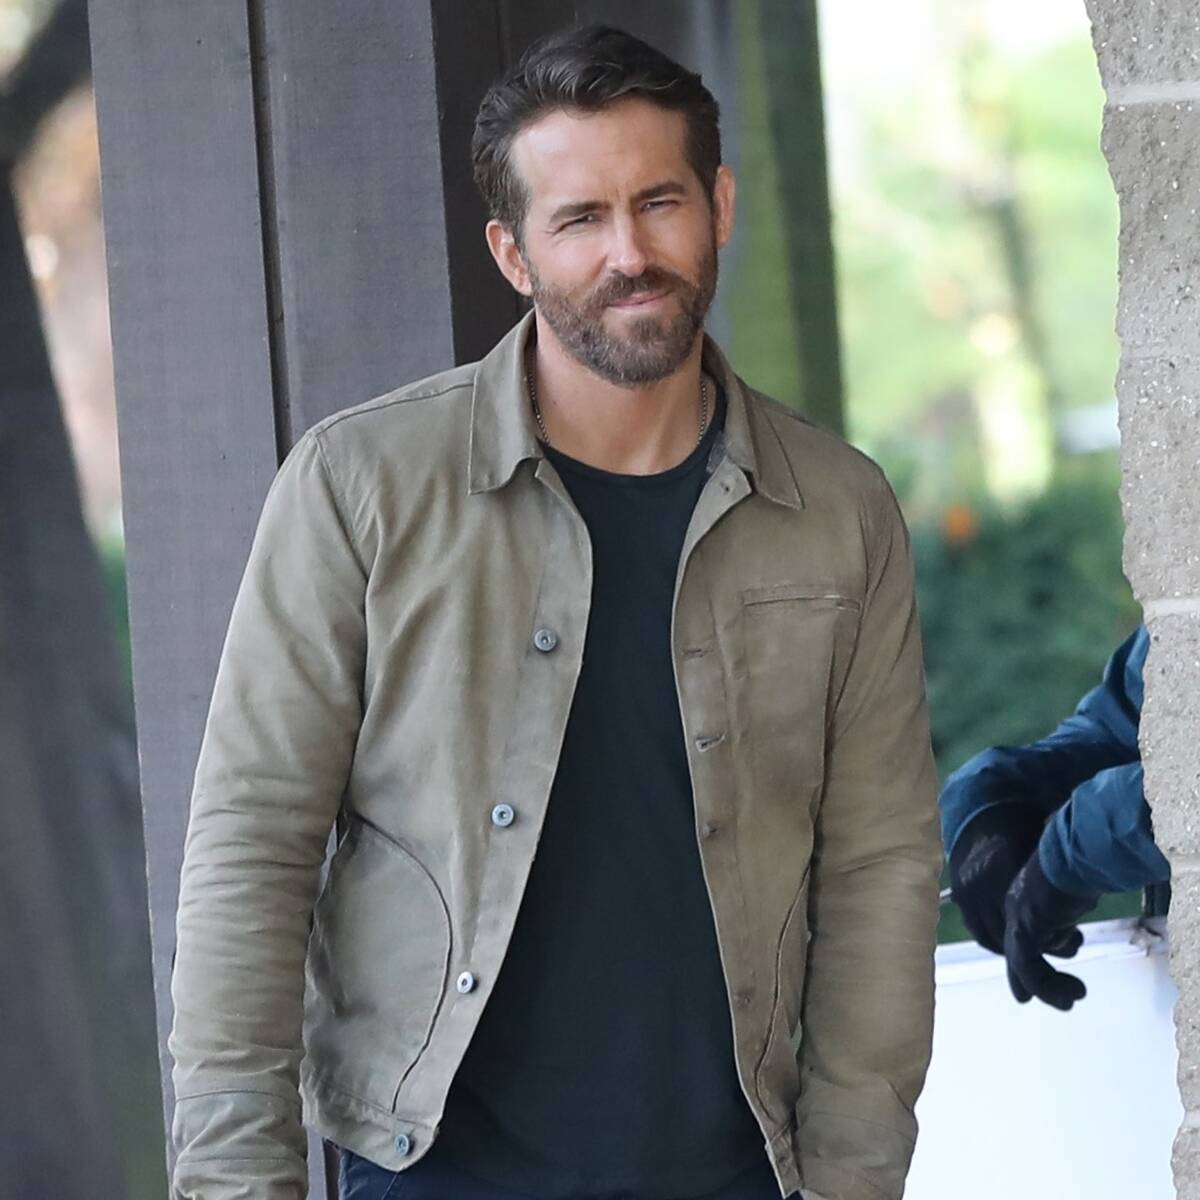 Ryan Reynolds Sends Cheeky Response to David Beckham's Comment About His "Sore Wrist"